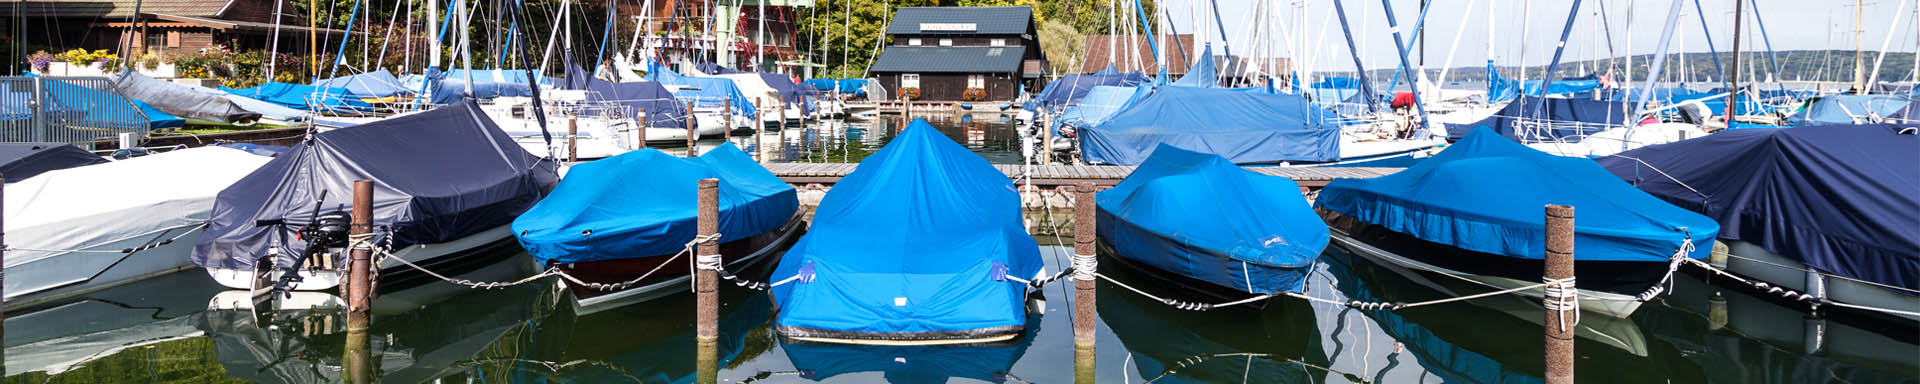 Boat in Marina with Covers on